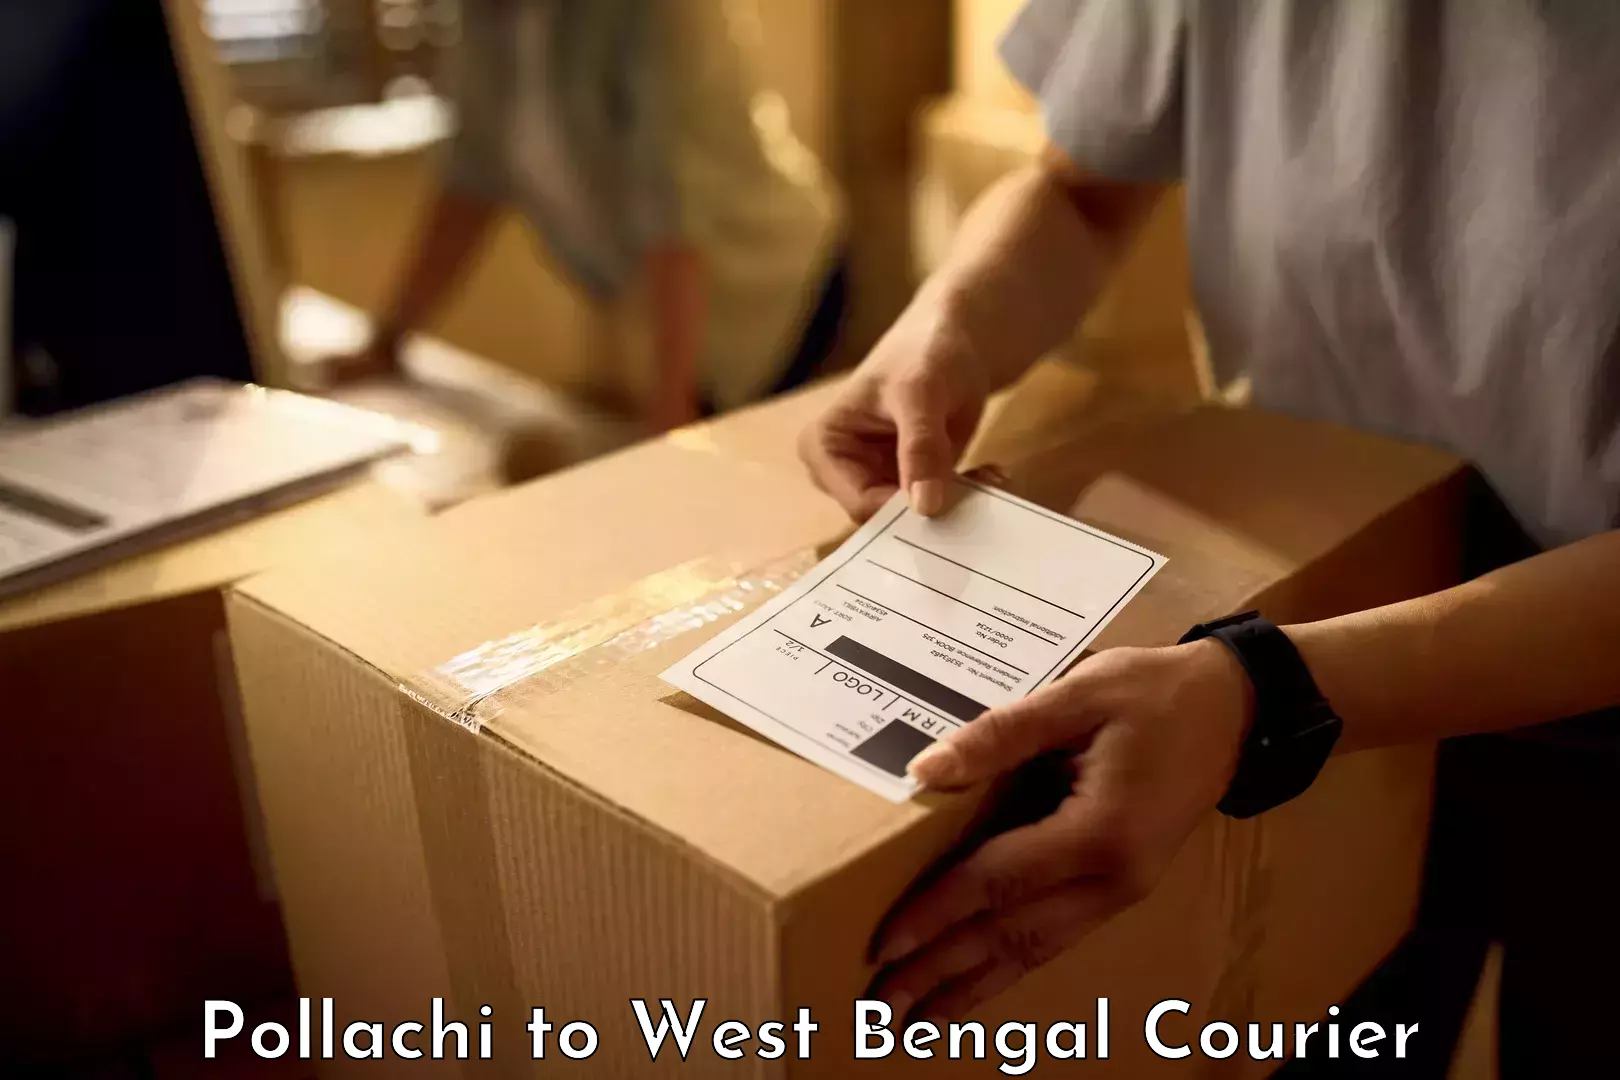 Luggage transport company Pollachi to West Bengal